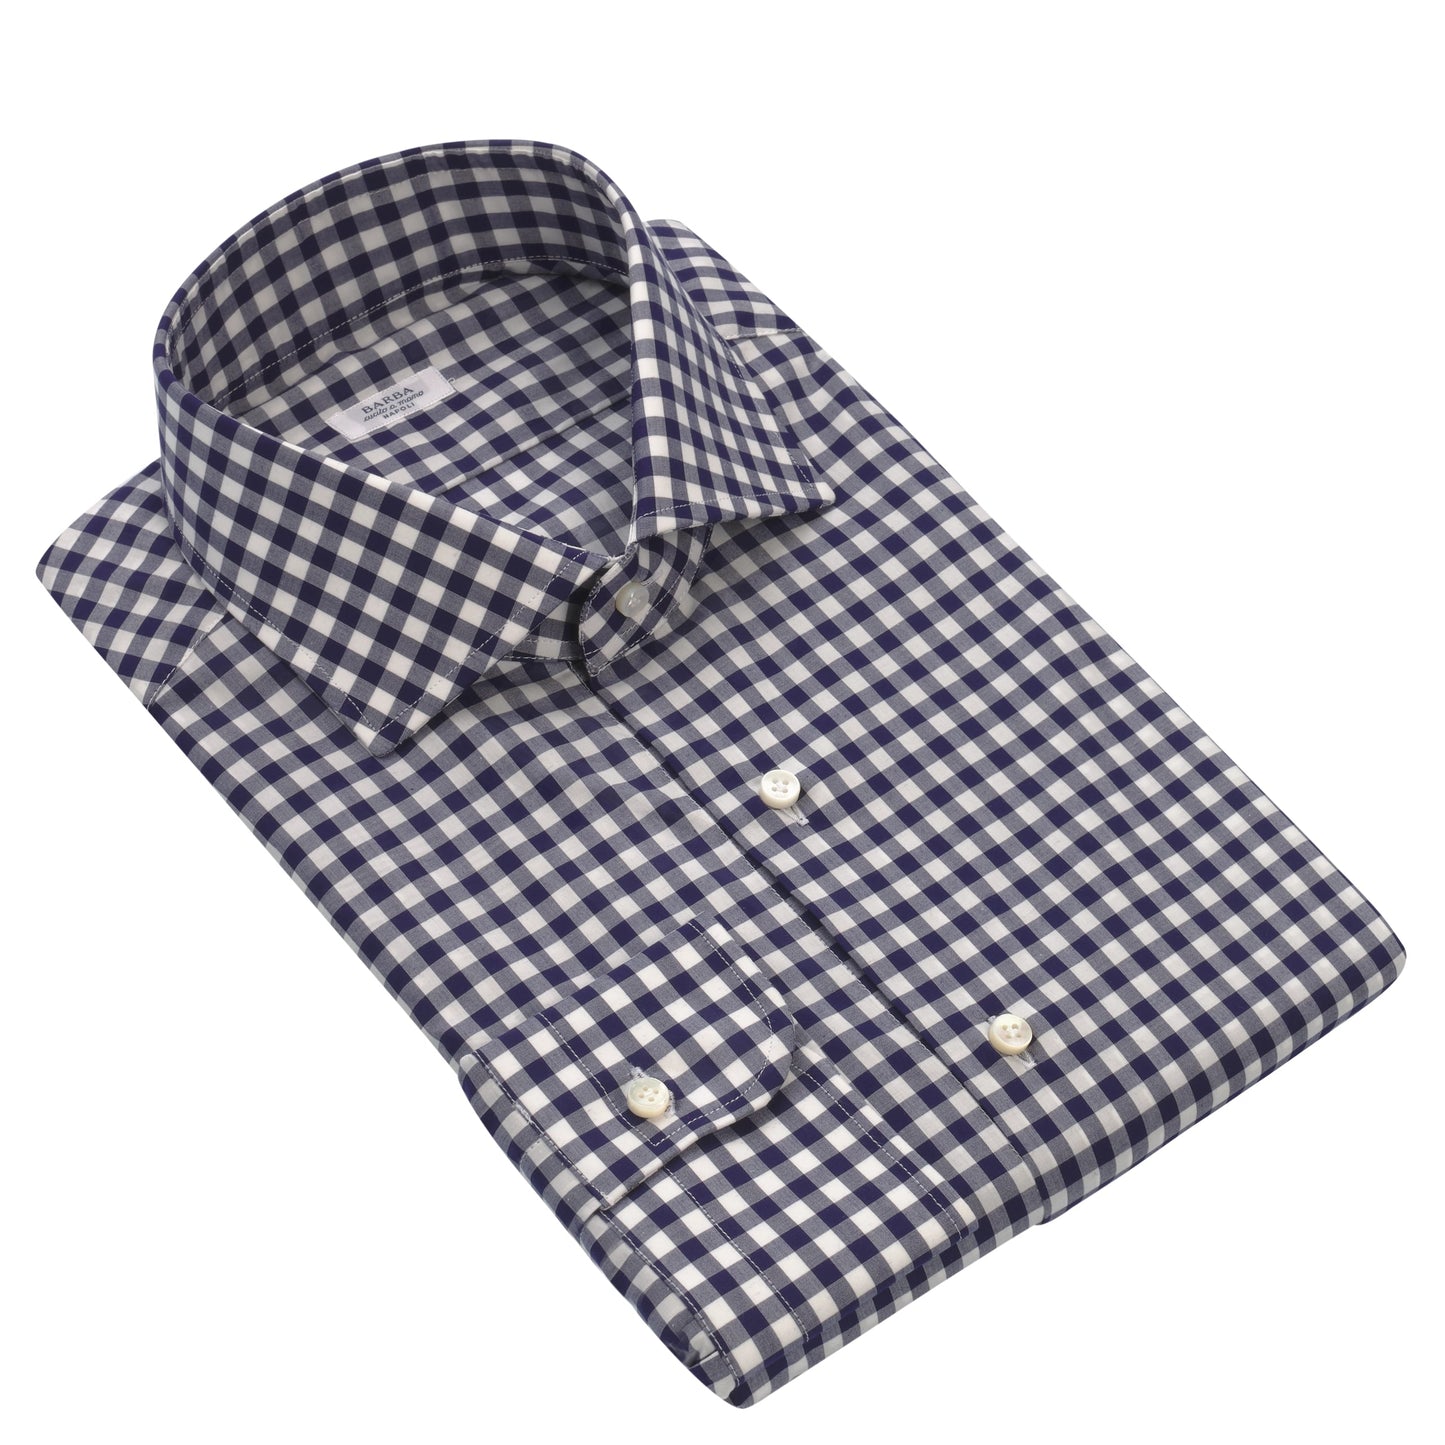 Barba Napoli Gingham - Checked Cotton Shirt in White and Cosmos Blue - SARTALE